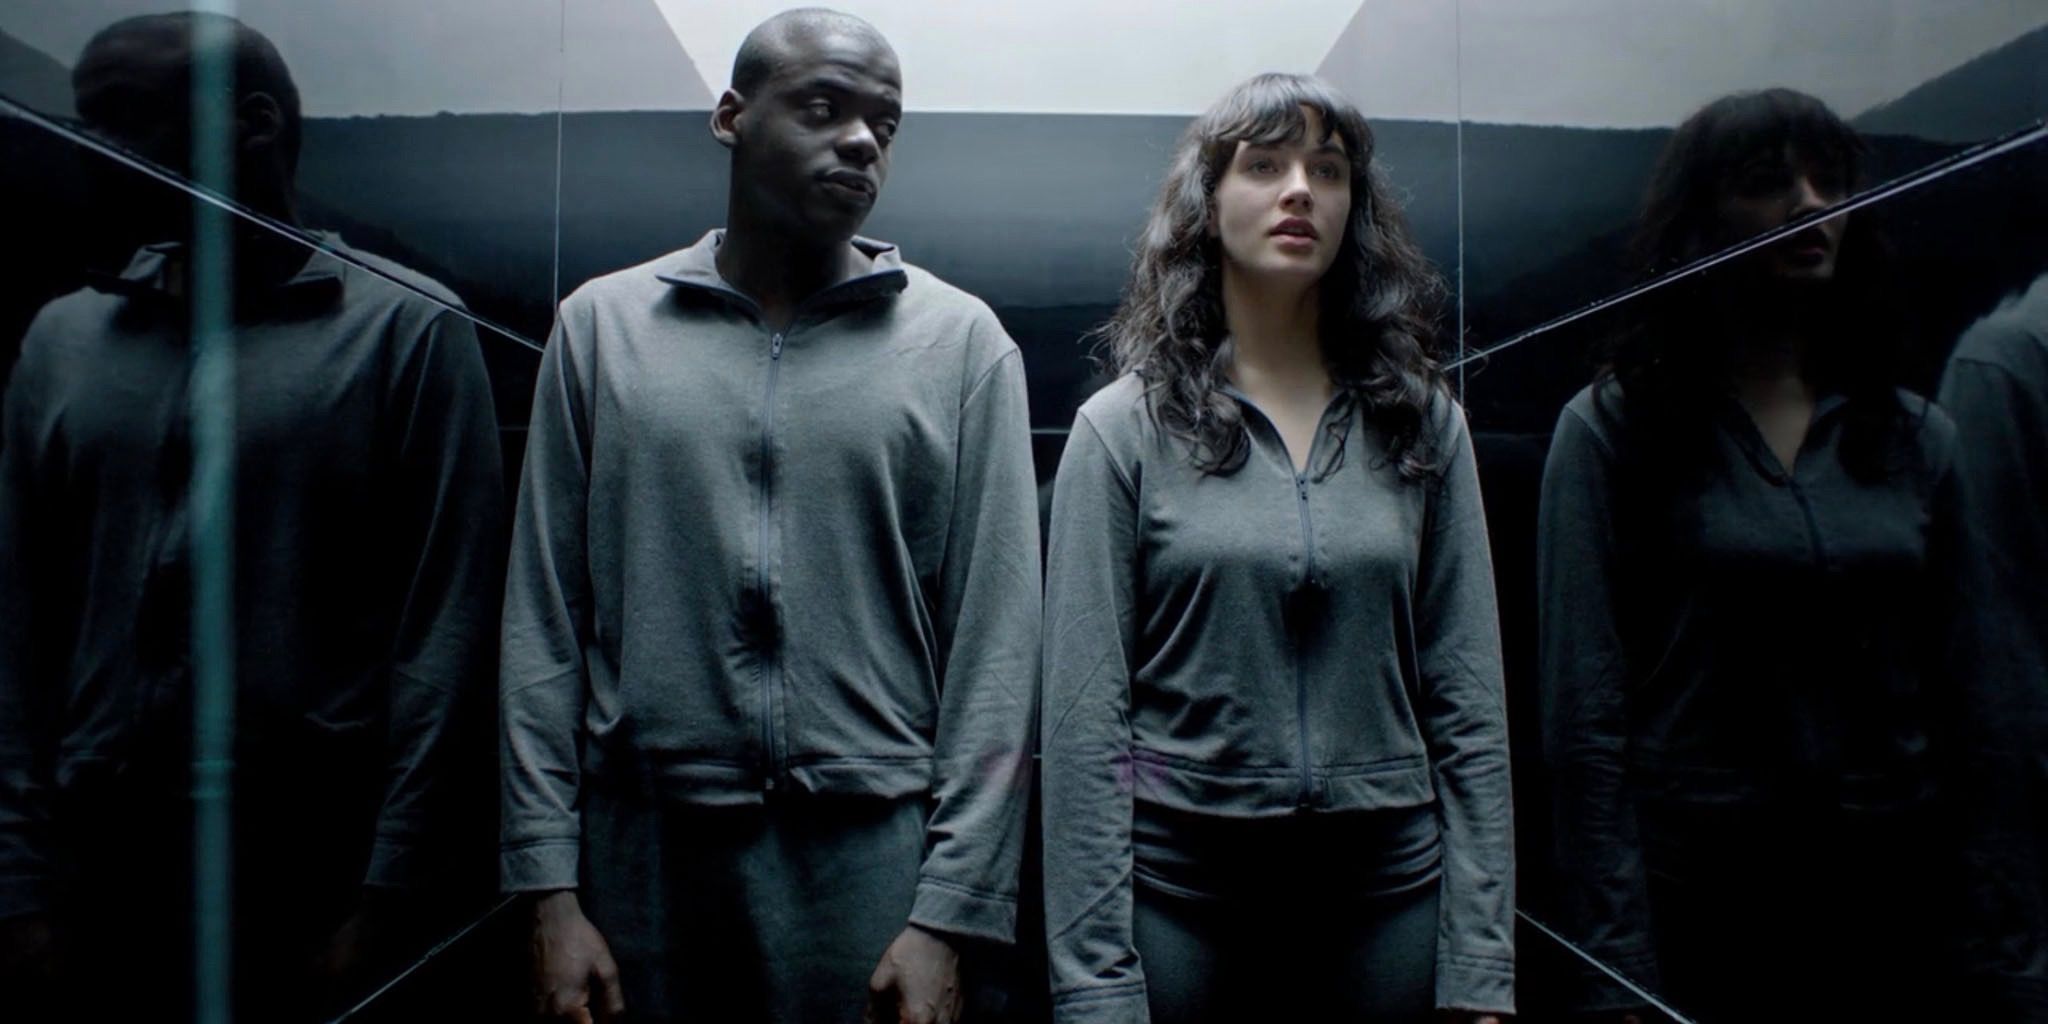 10 Best Episodes Of Black Mirror RELATED Black Mirror 10 Most Evil Characters Ranked